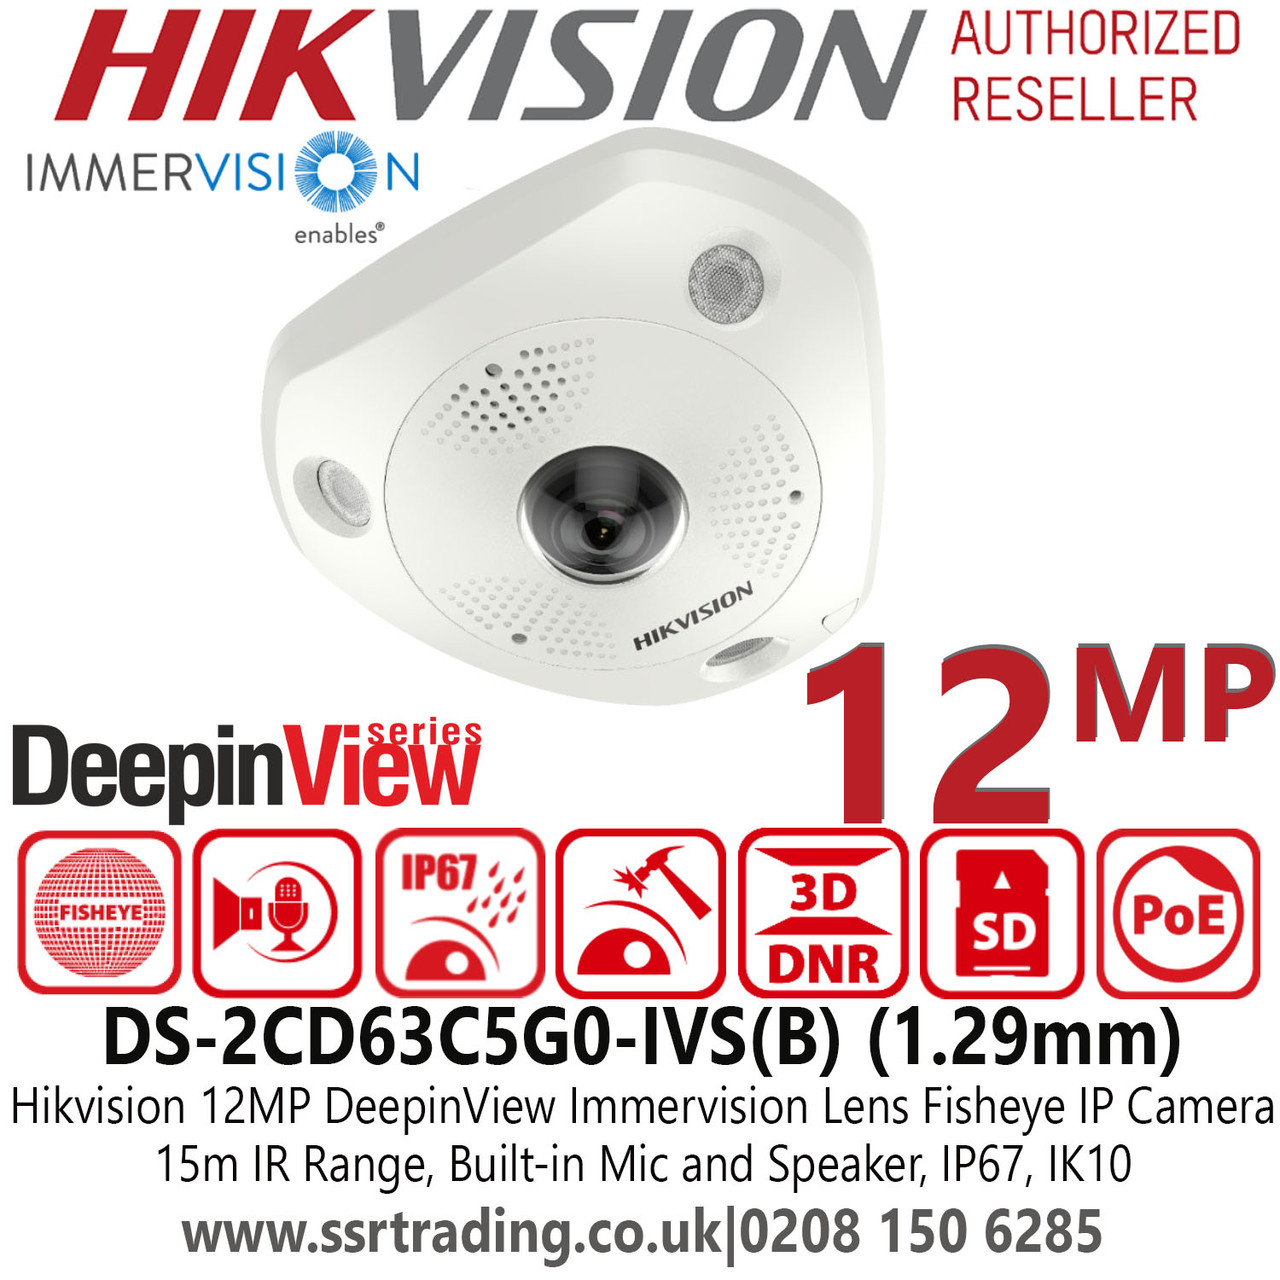 DS-2CD63C5G0-IVS(B) Hikvision 12MP IP PoE Fisheye Outdoor Camera with  1.29mm Fixed Lens, Built-in Mic And Speaker, Built-in Memory Card Slot,  IP67, IK10